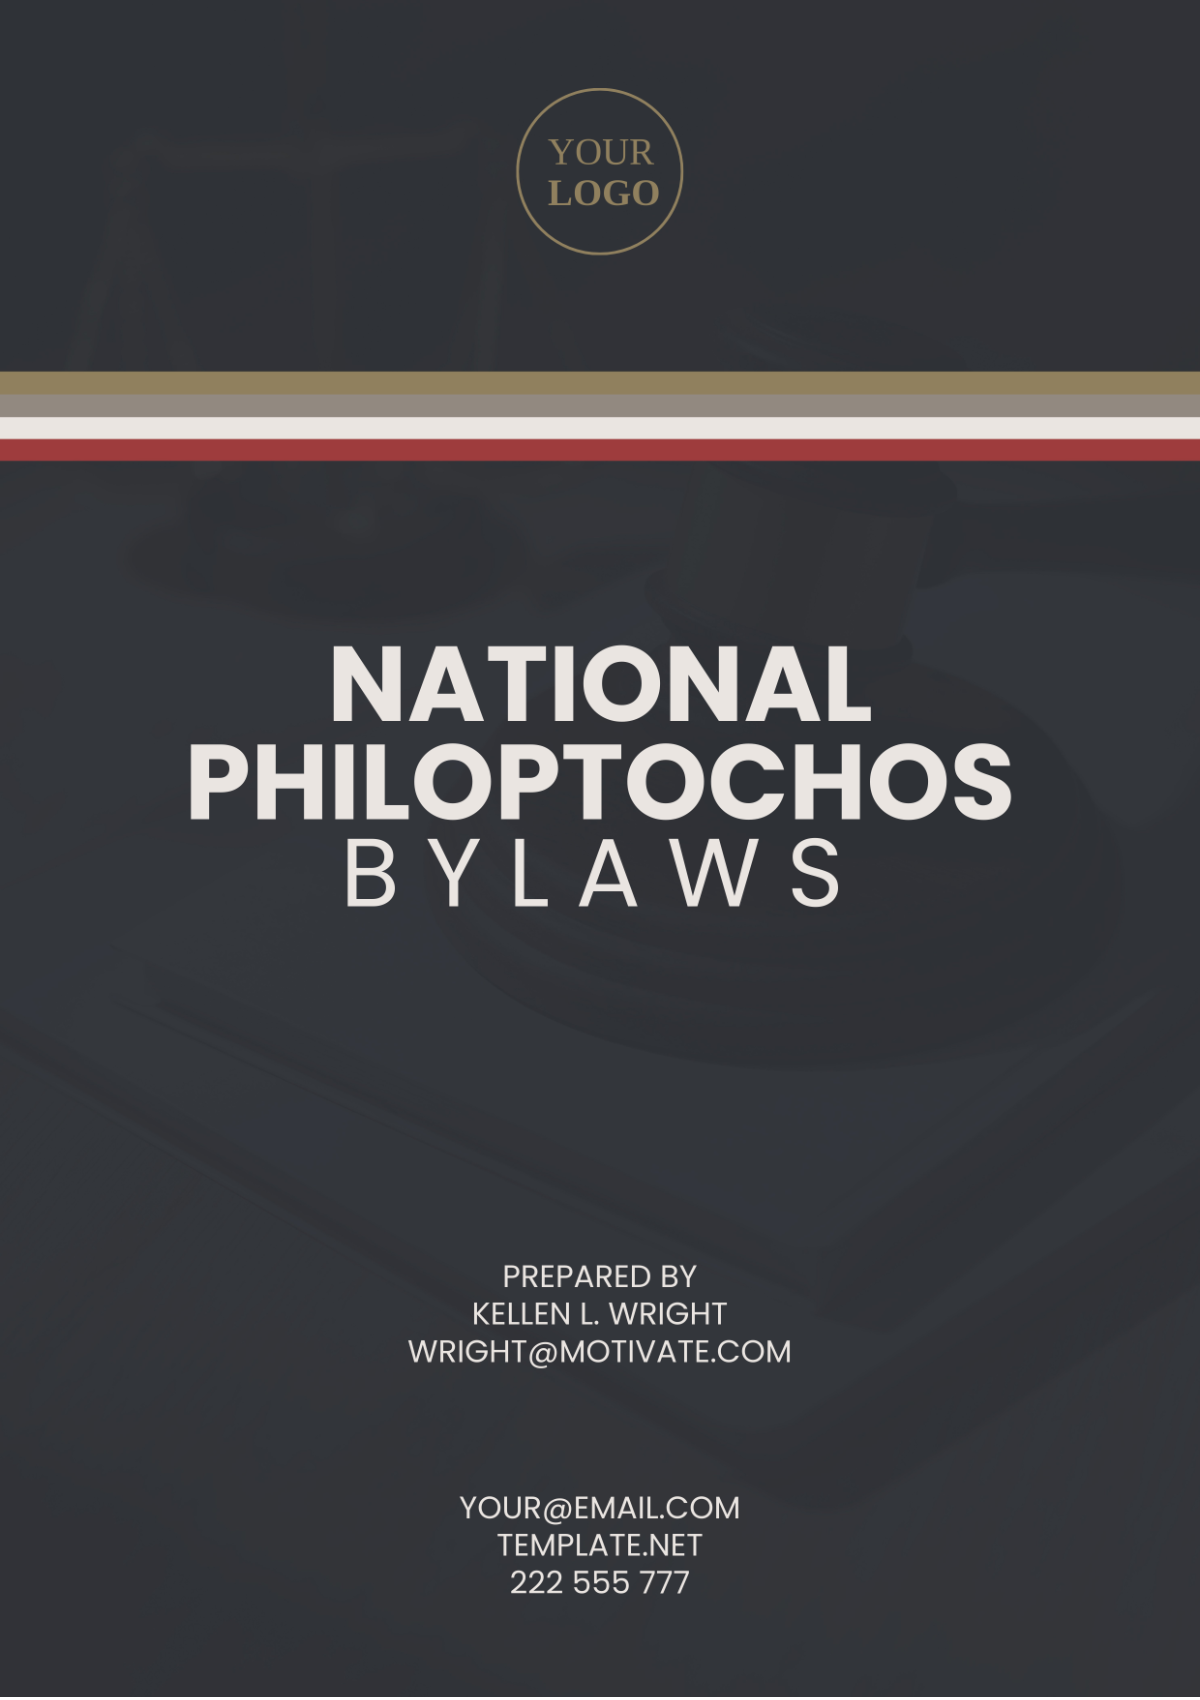 National Philoptochos Bylaws Template